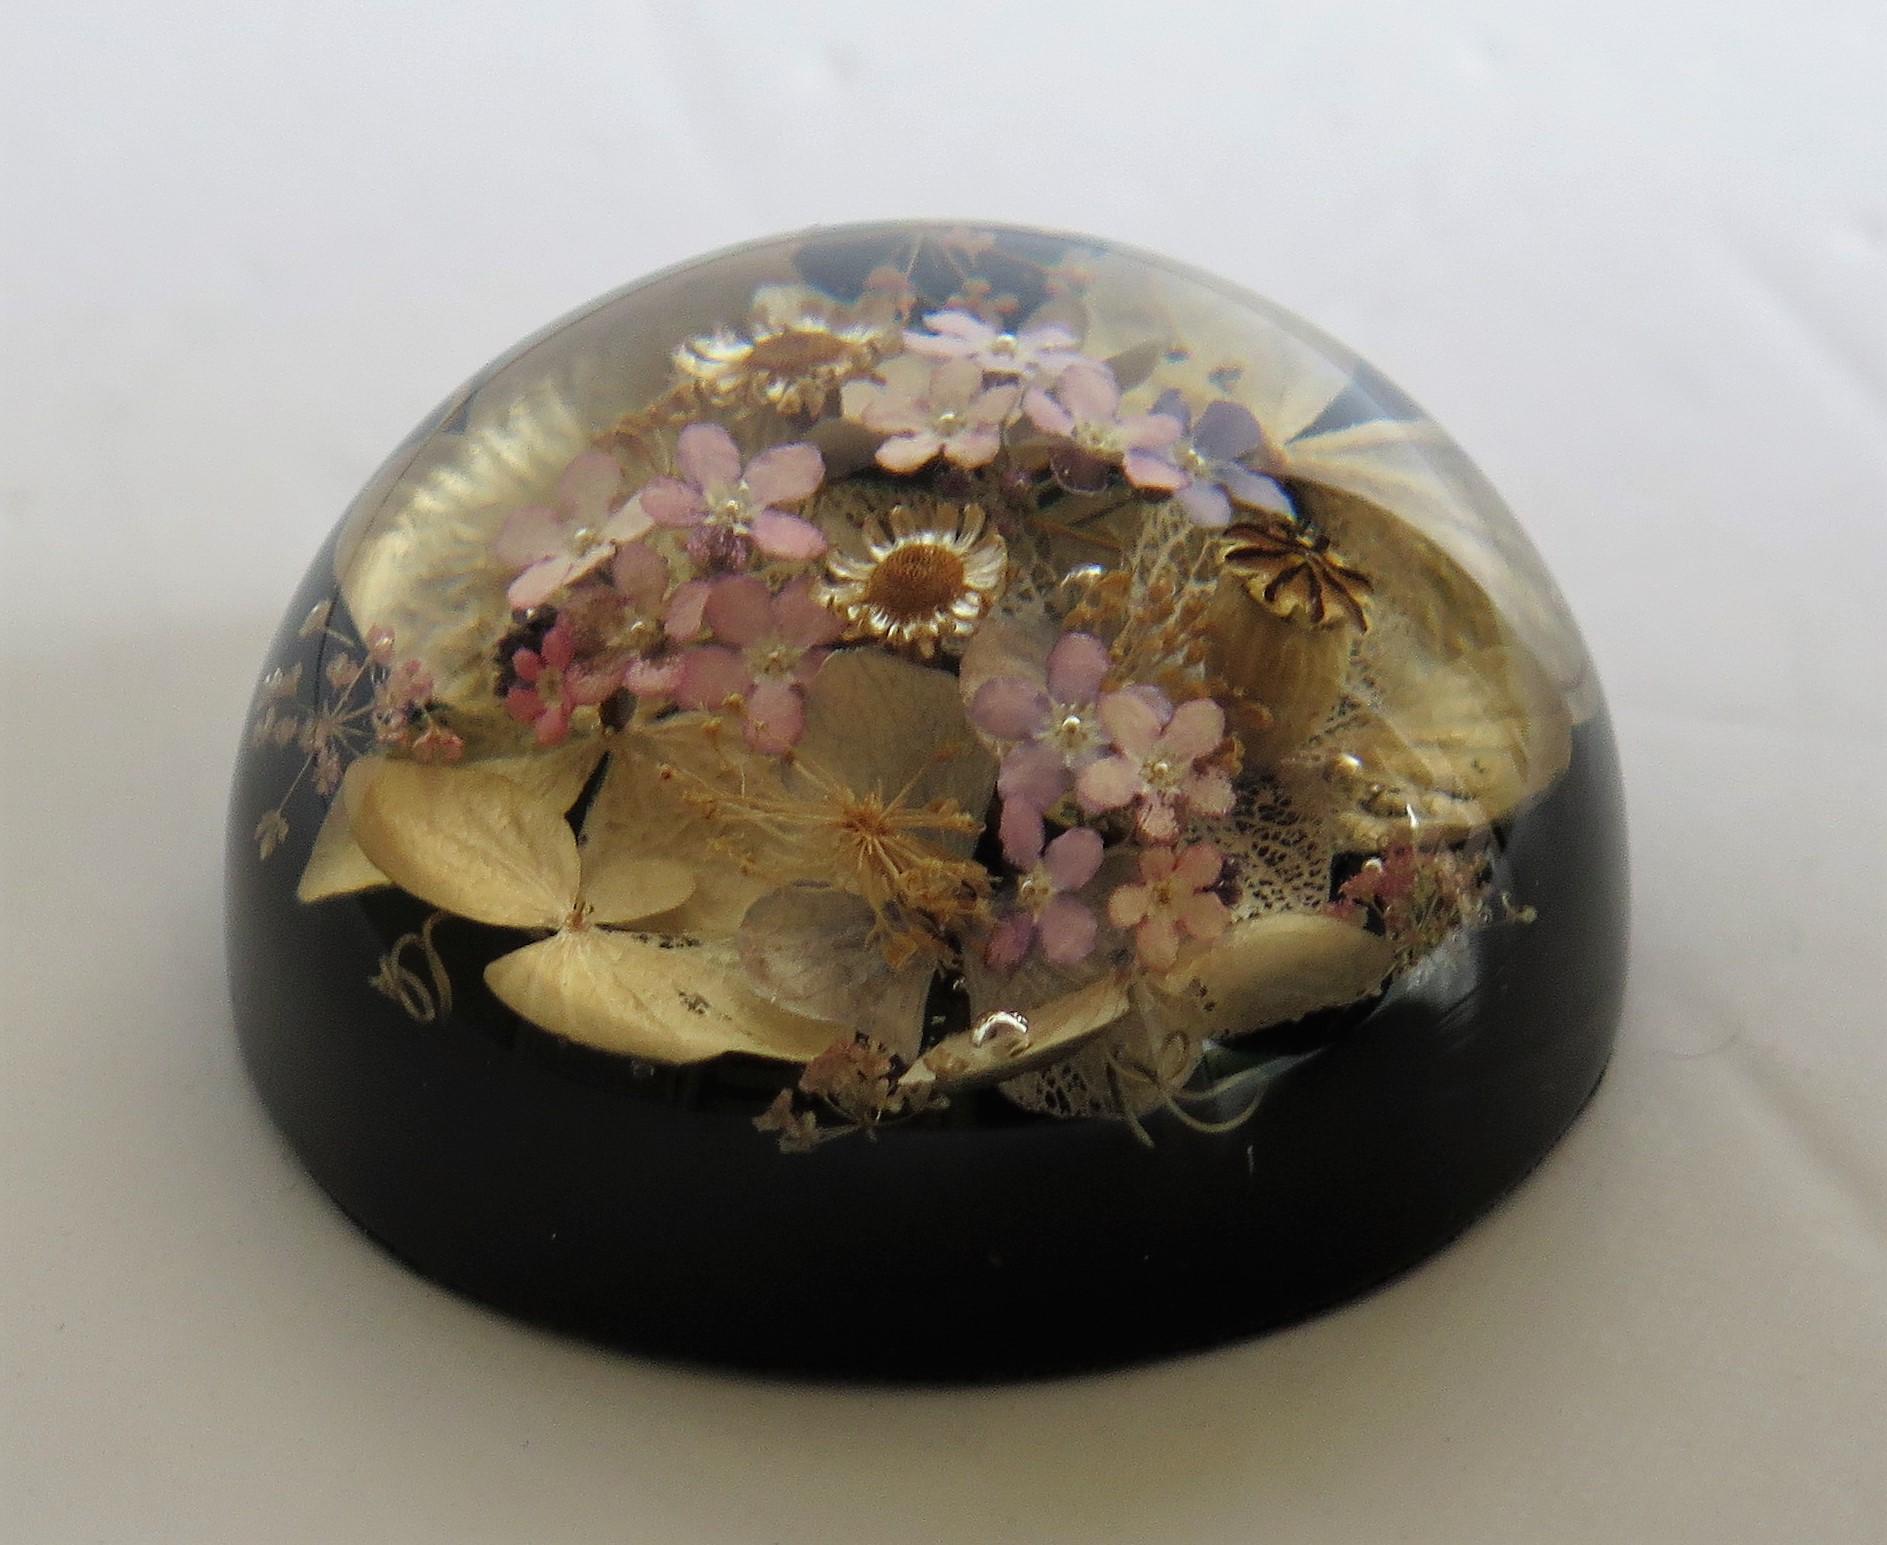 20th Century Handmade Paperweight with Real Wild Flowers by Sarah Rogers, English circa 1970s